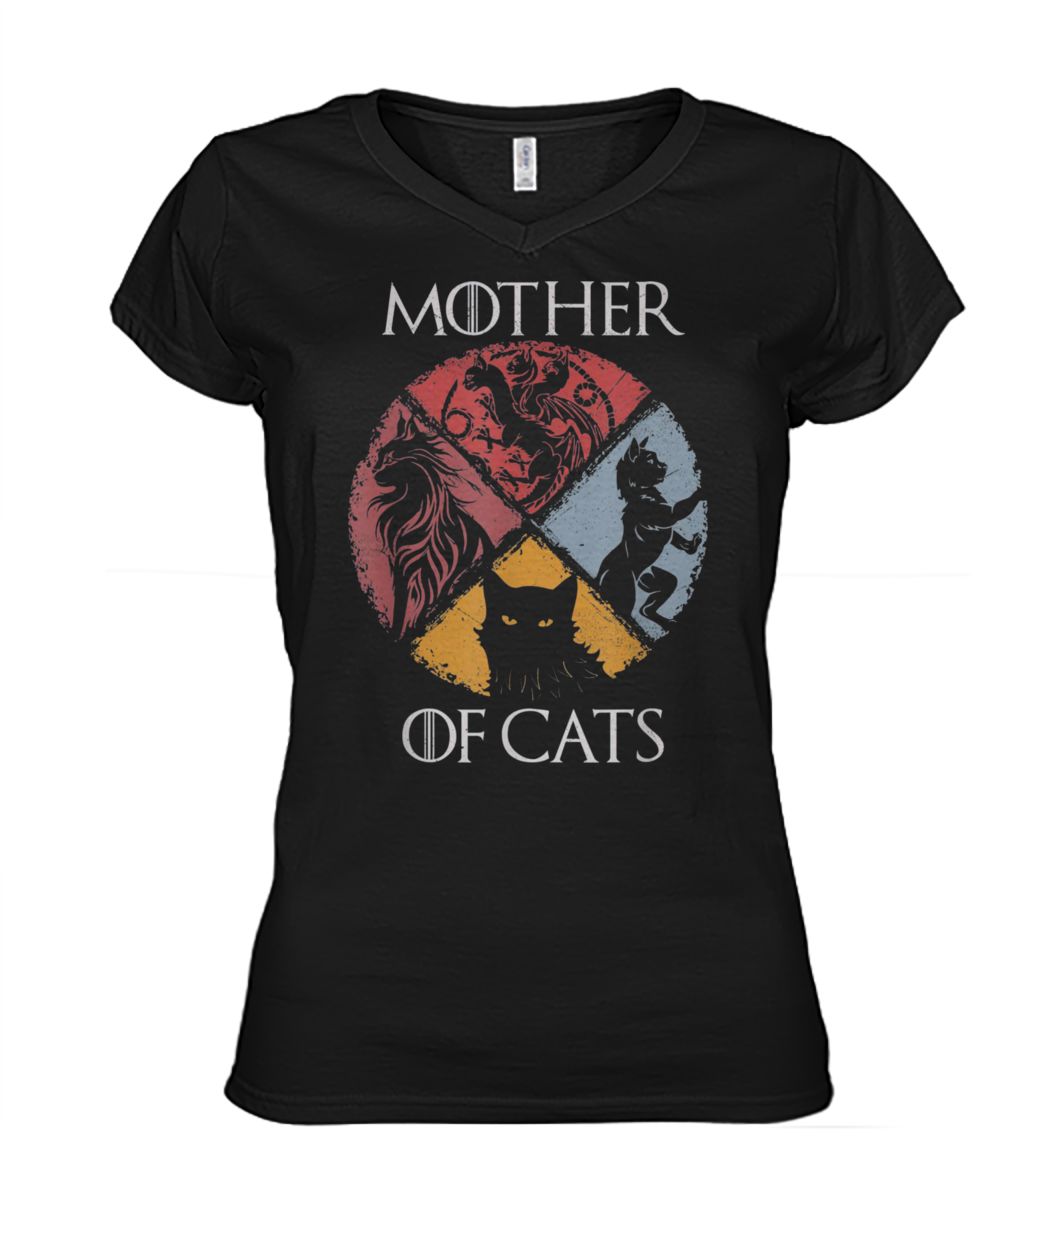 Mother of cats game of thrones women's v-neck